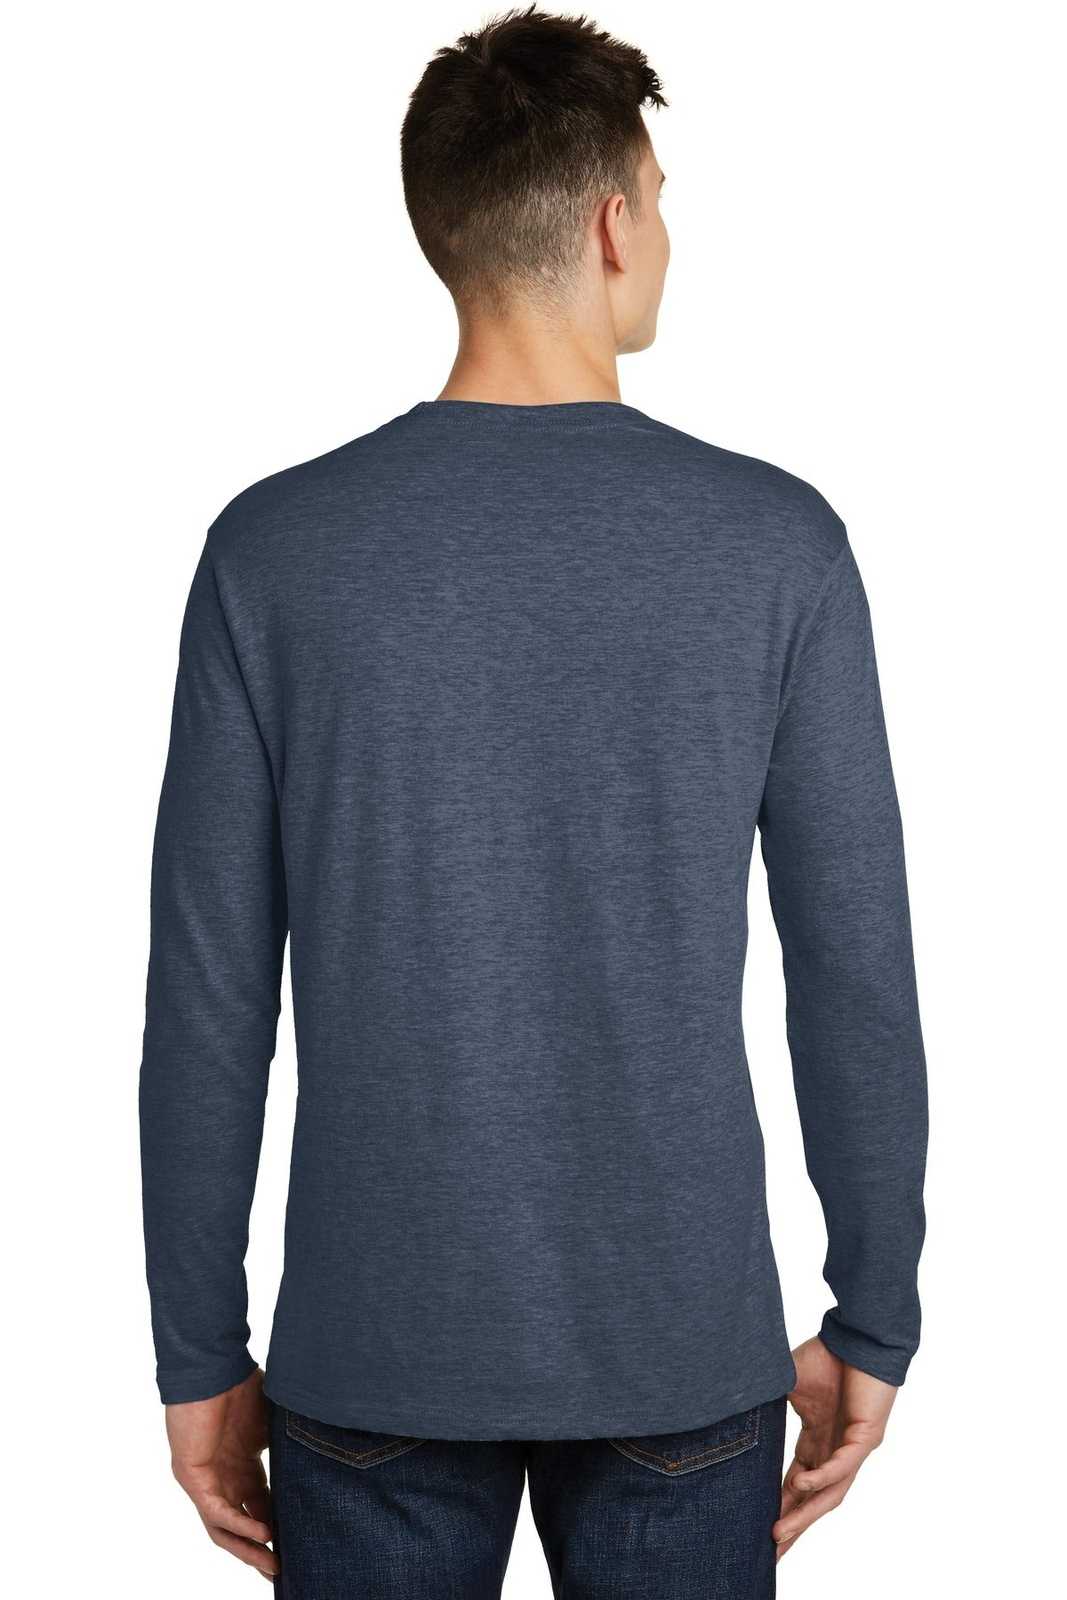 District DT6200 Very Important Tee Long Sleeve - Heathered Navy - HIT a Double - 2